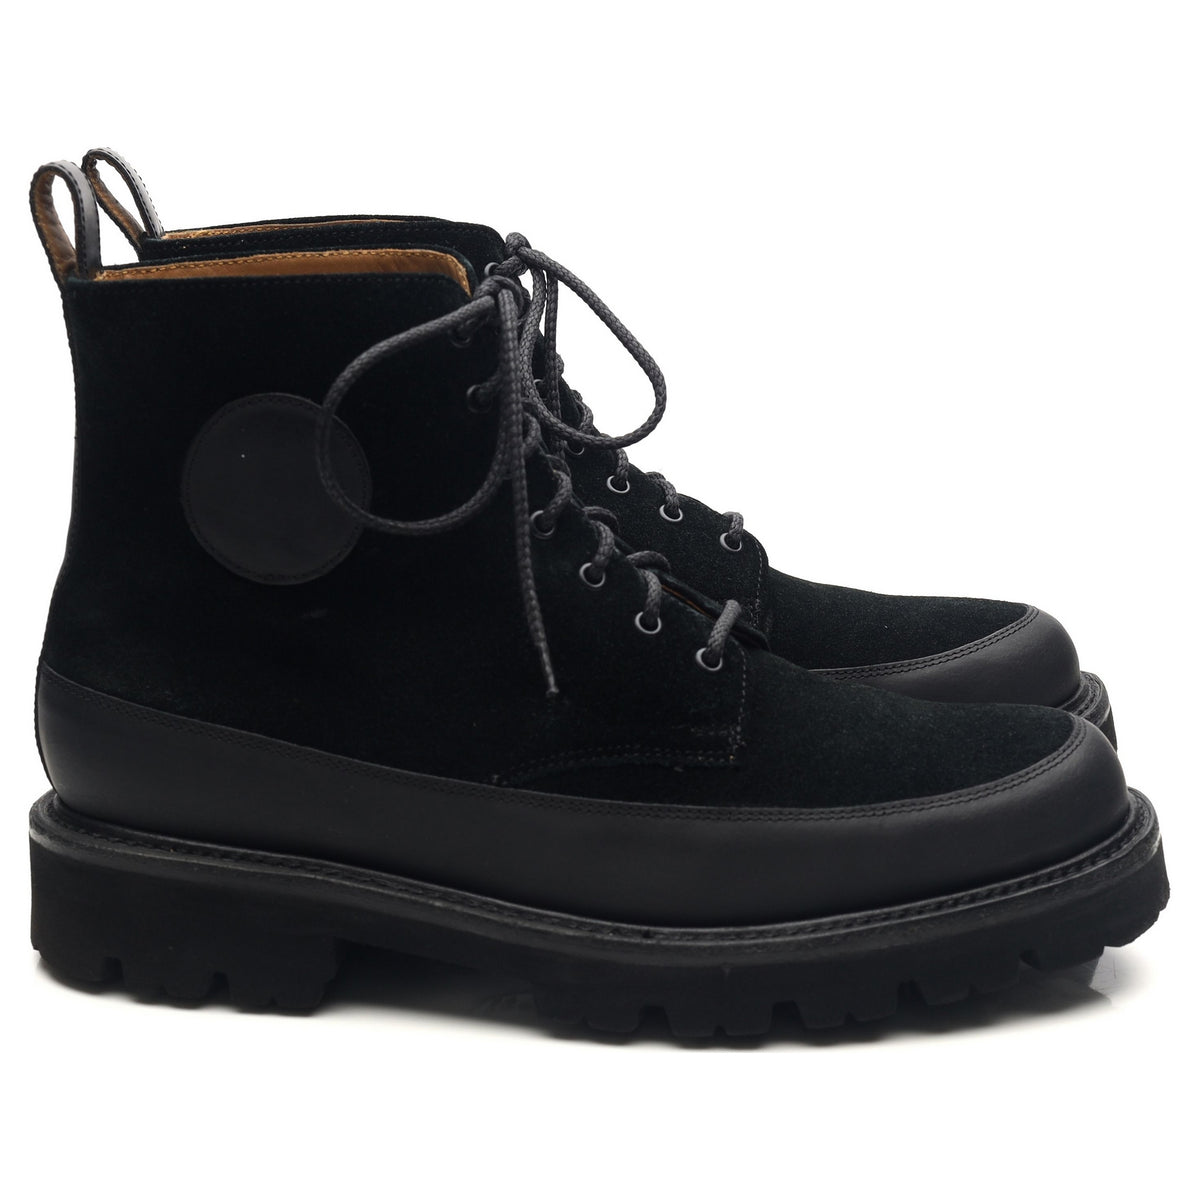 Black Leather Boots UK 6.5 G